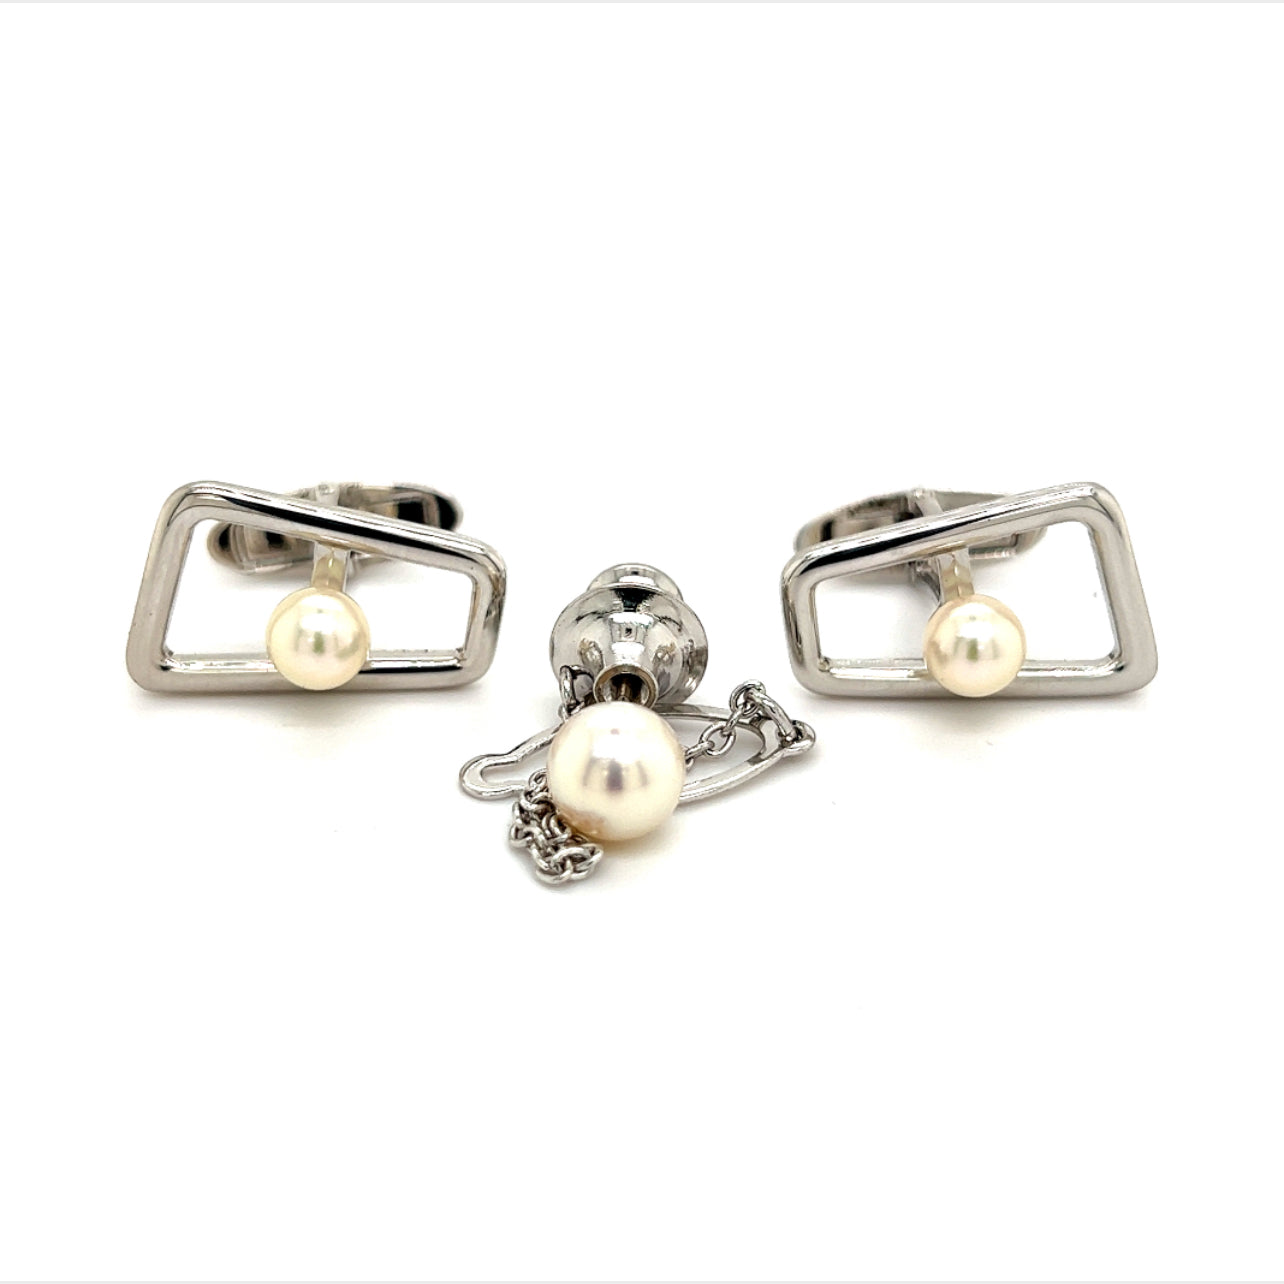 Mikimoto Estate Akoya Pearl Cufflinks and Tie Pin Sterling Silver 7.28 mm M276 - Certified Fine Jewelry